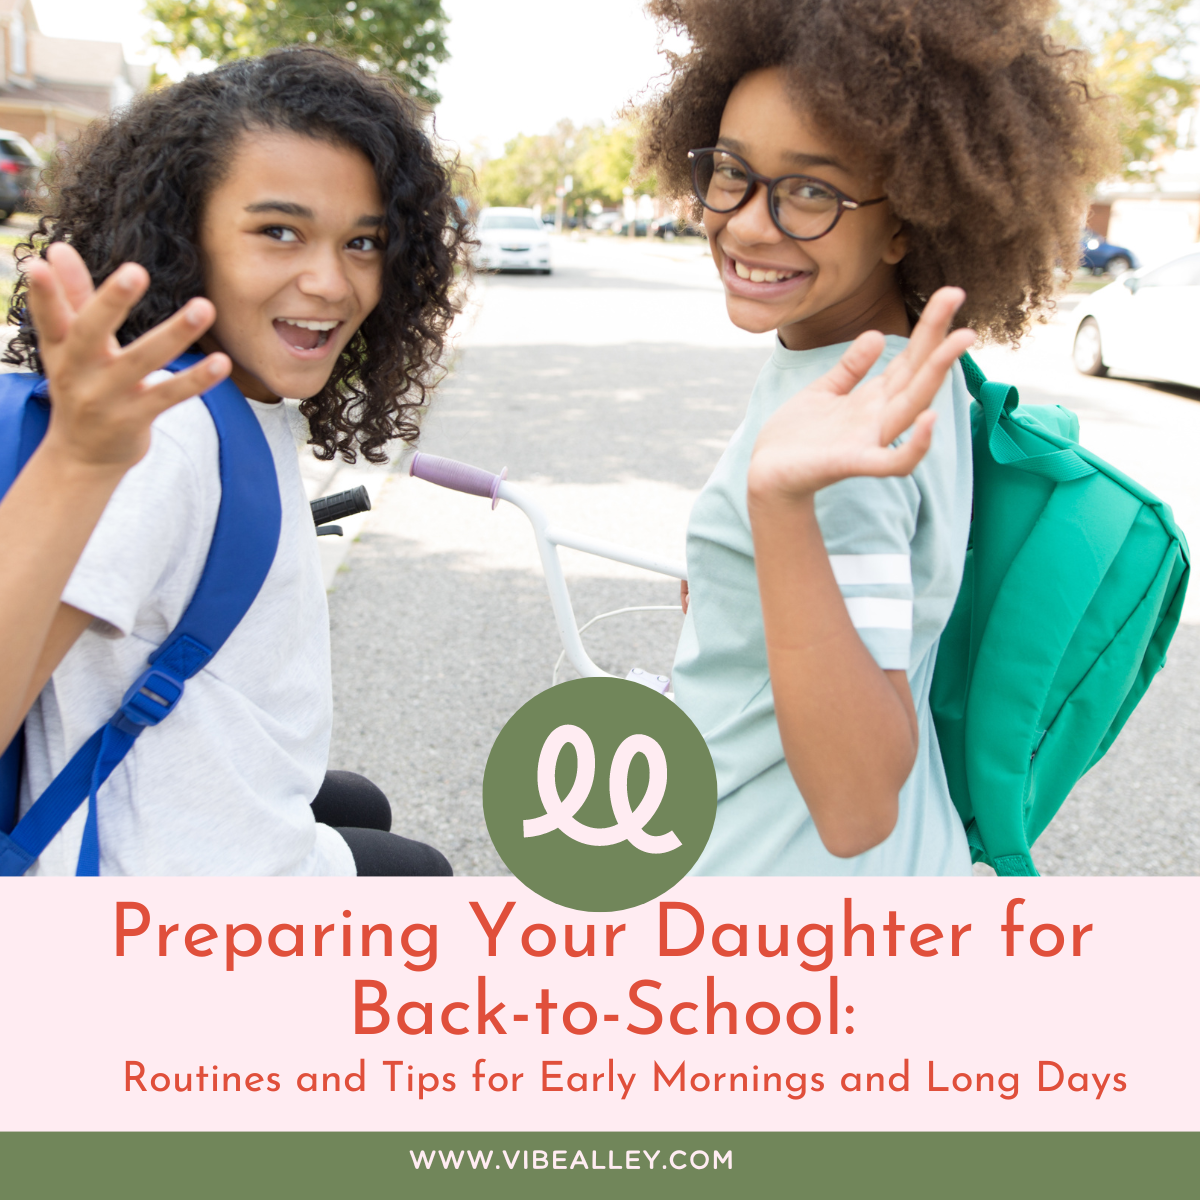 Preparing Your Daughter for Back-to-School: Routines and Tips for Early Mornings and Long Days